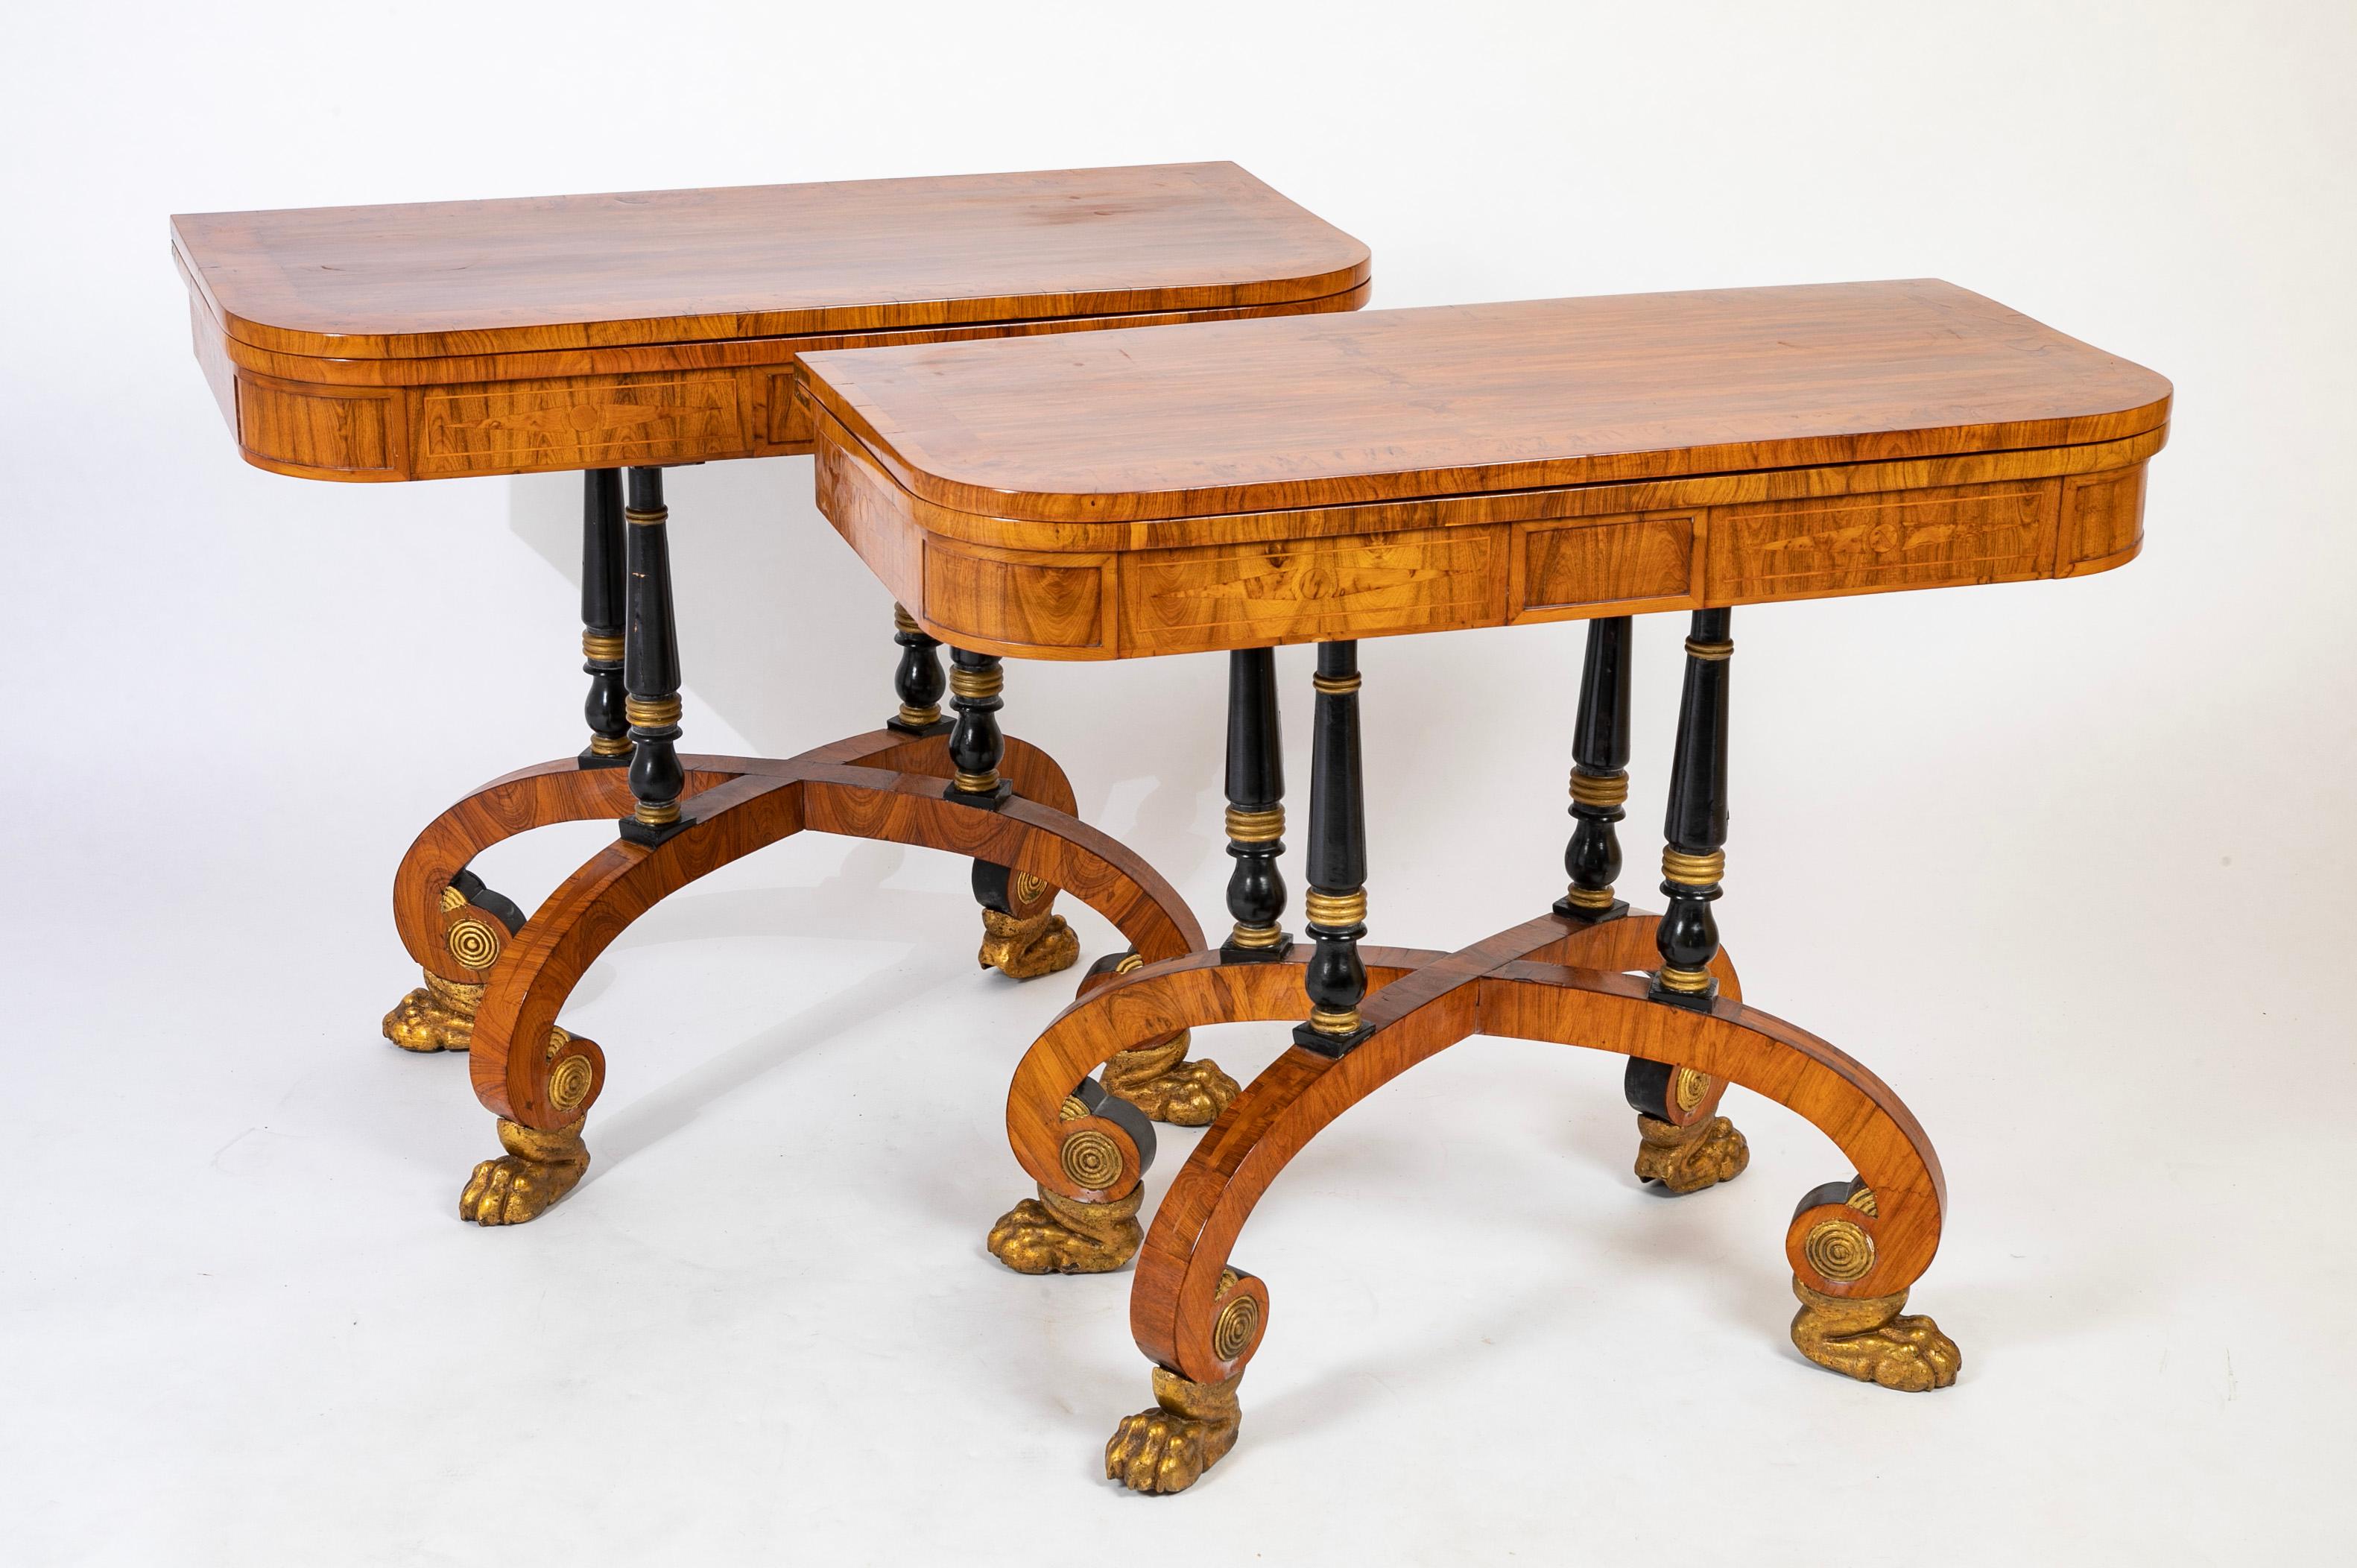 Rare Regency pair of games tables of rosewood and burl leather games interiors over unusual scroll legs and gilded paw feet.   Games pieces included.    Circa 1820.